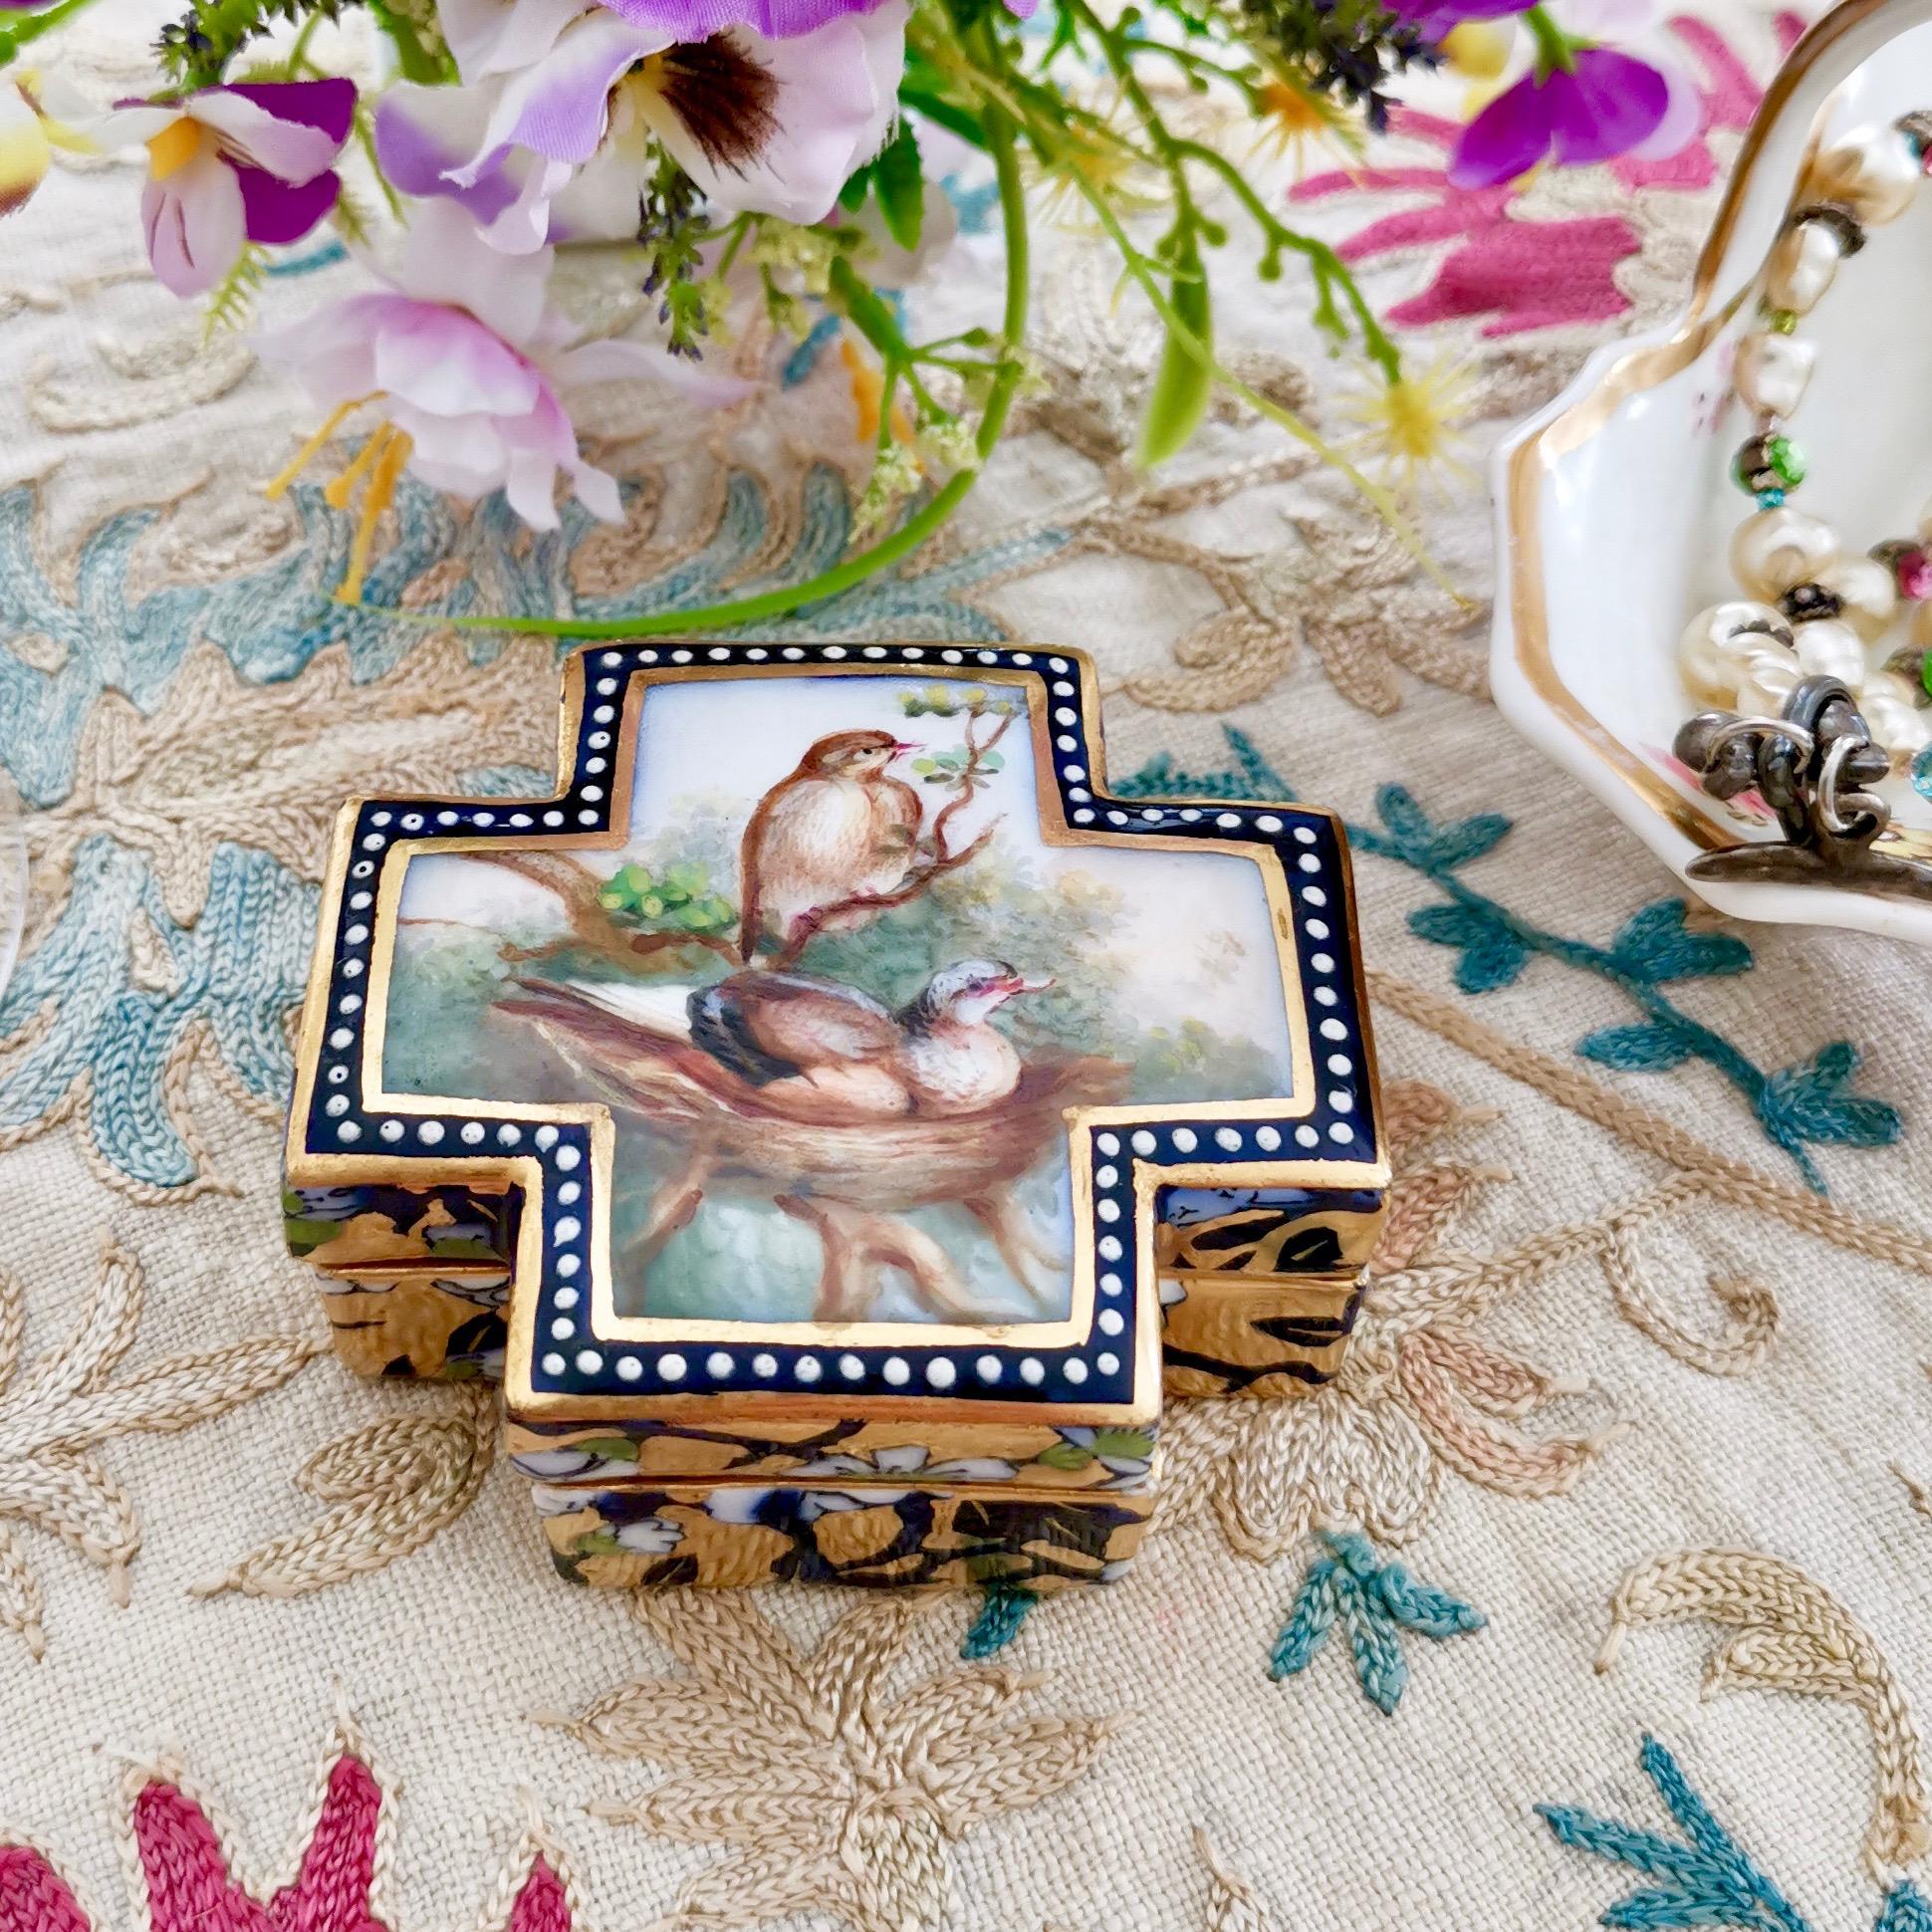 This is a beautiful and rare trinket box made by Coalport probably between 1865 and 1870. It was painted with birds on their nest by the famous porcelain bird painter John Randall, and it is an exceptionally beautiful example of Randall's style in